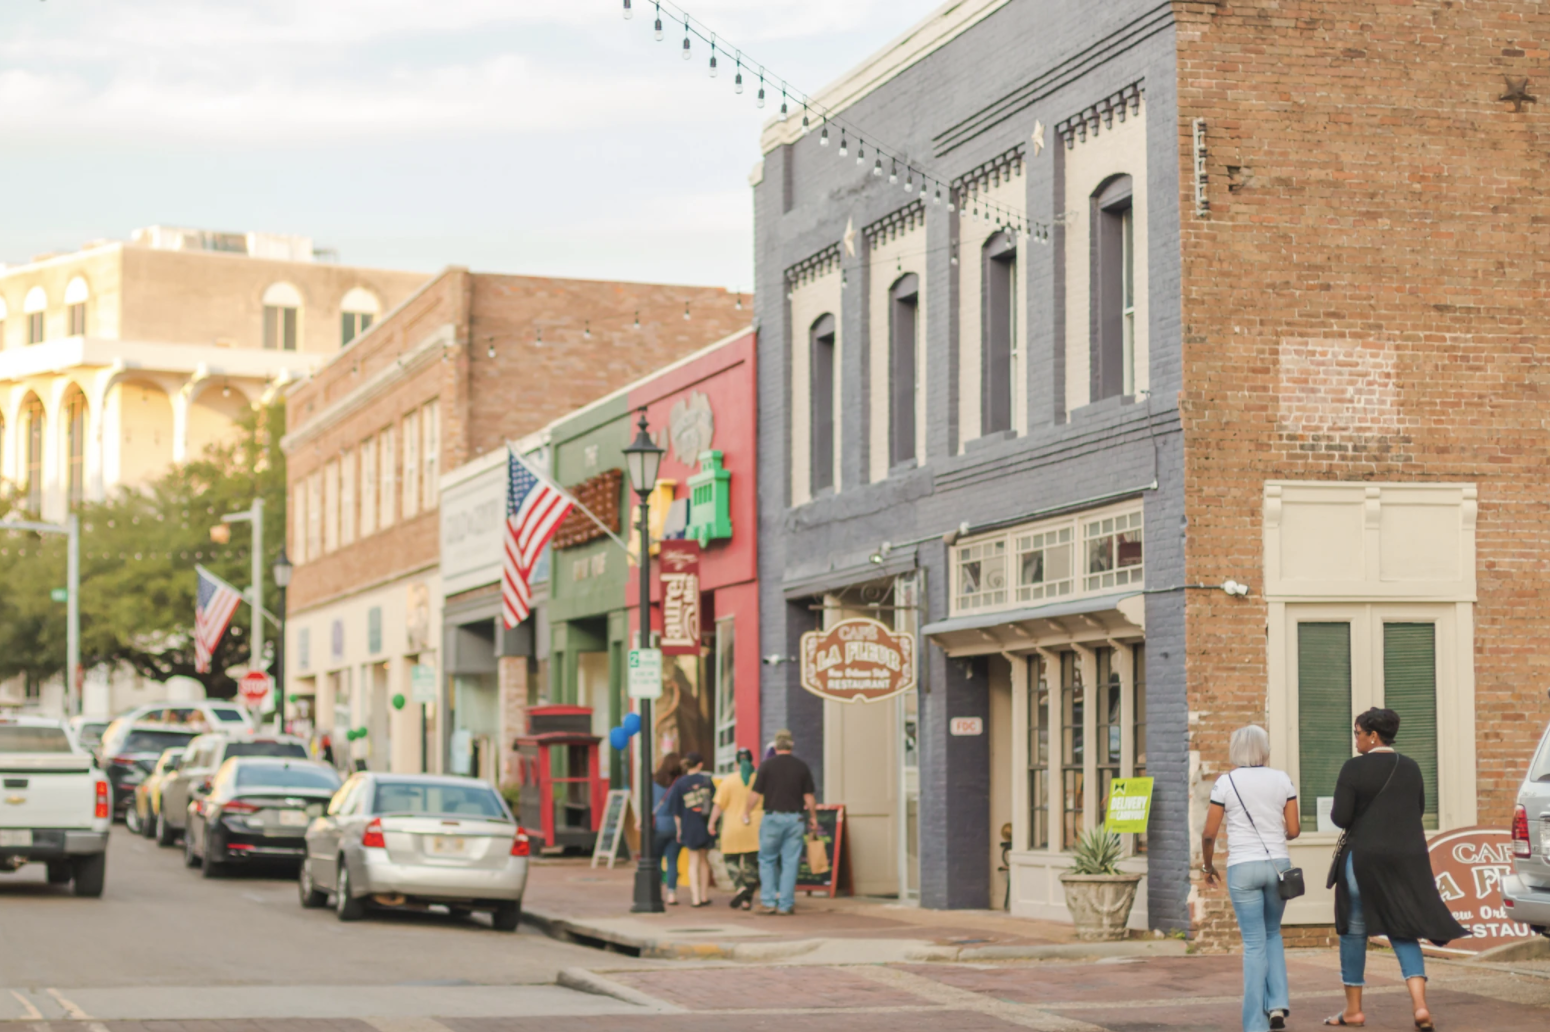 10 Best Small Towns in America - Prettiest Small Towns in America